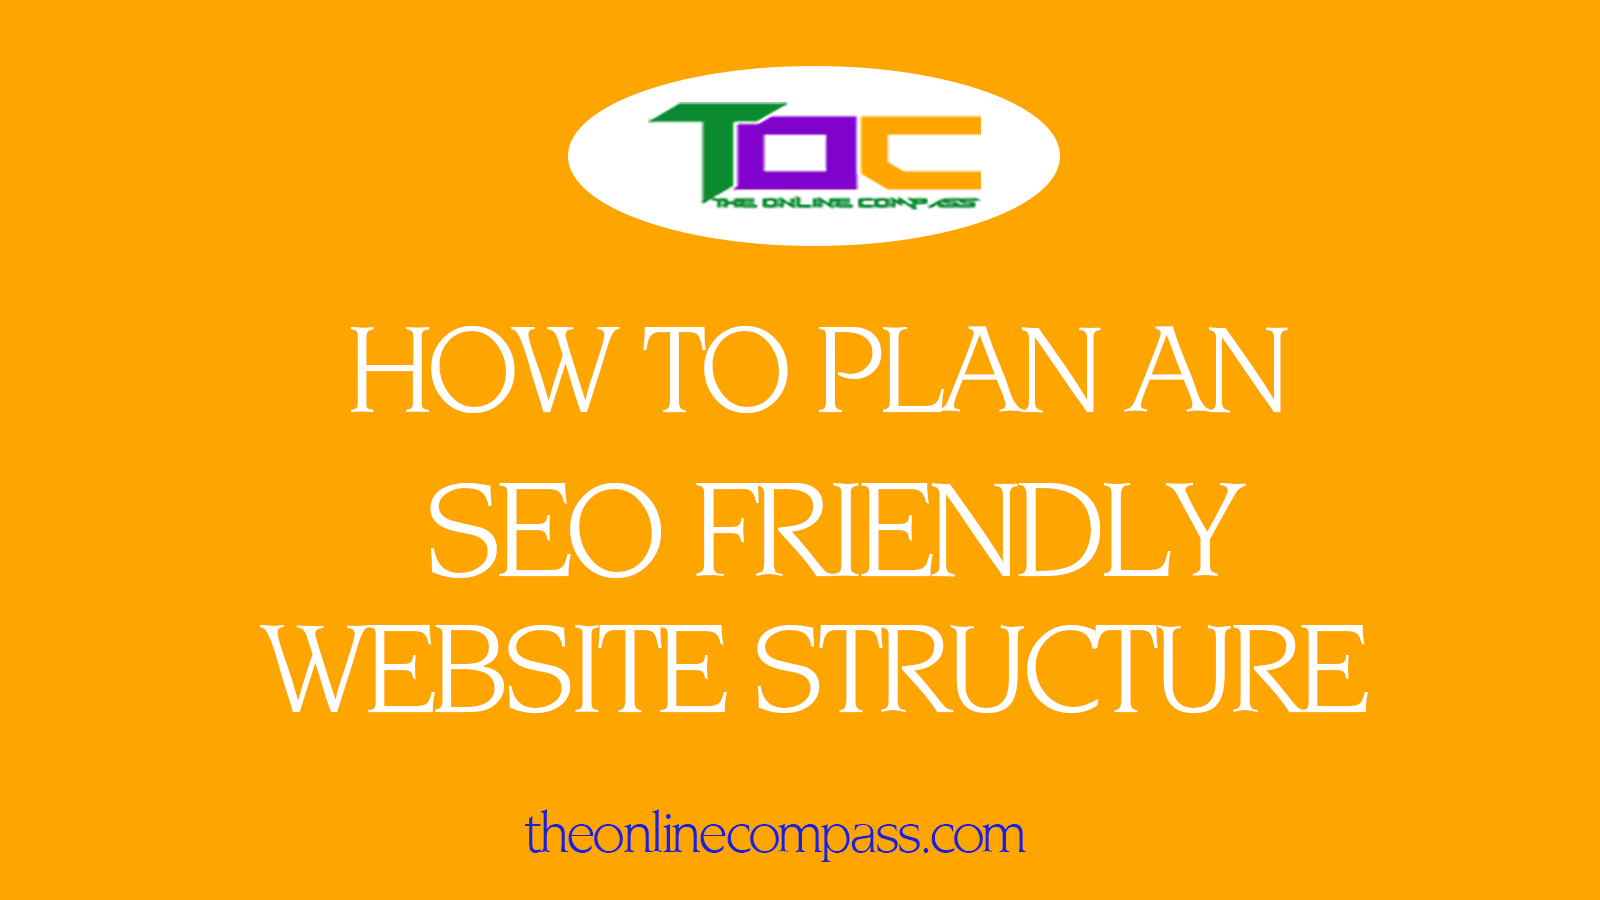 How to plan an SEO friendly website /site structure